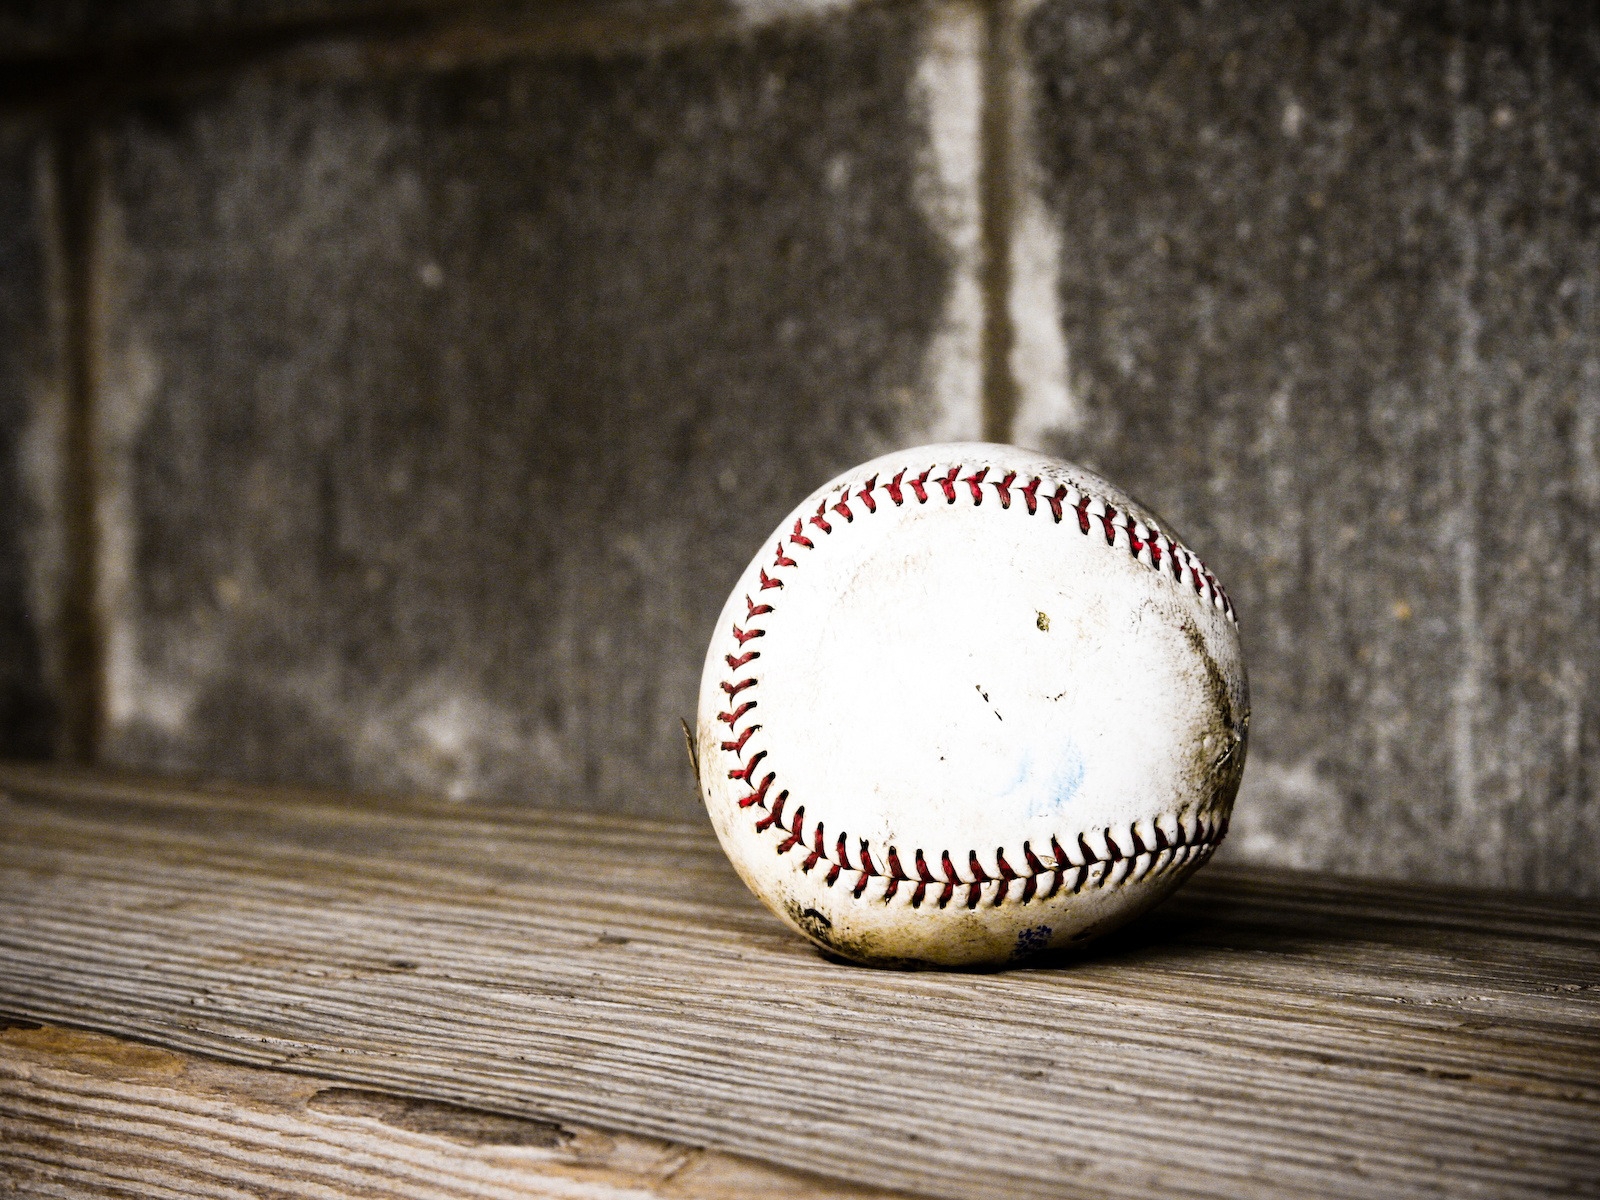 Used Baseball for 1600 x 1200 resolution